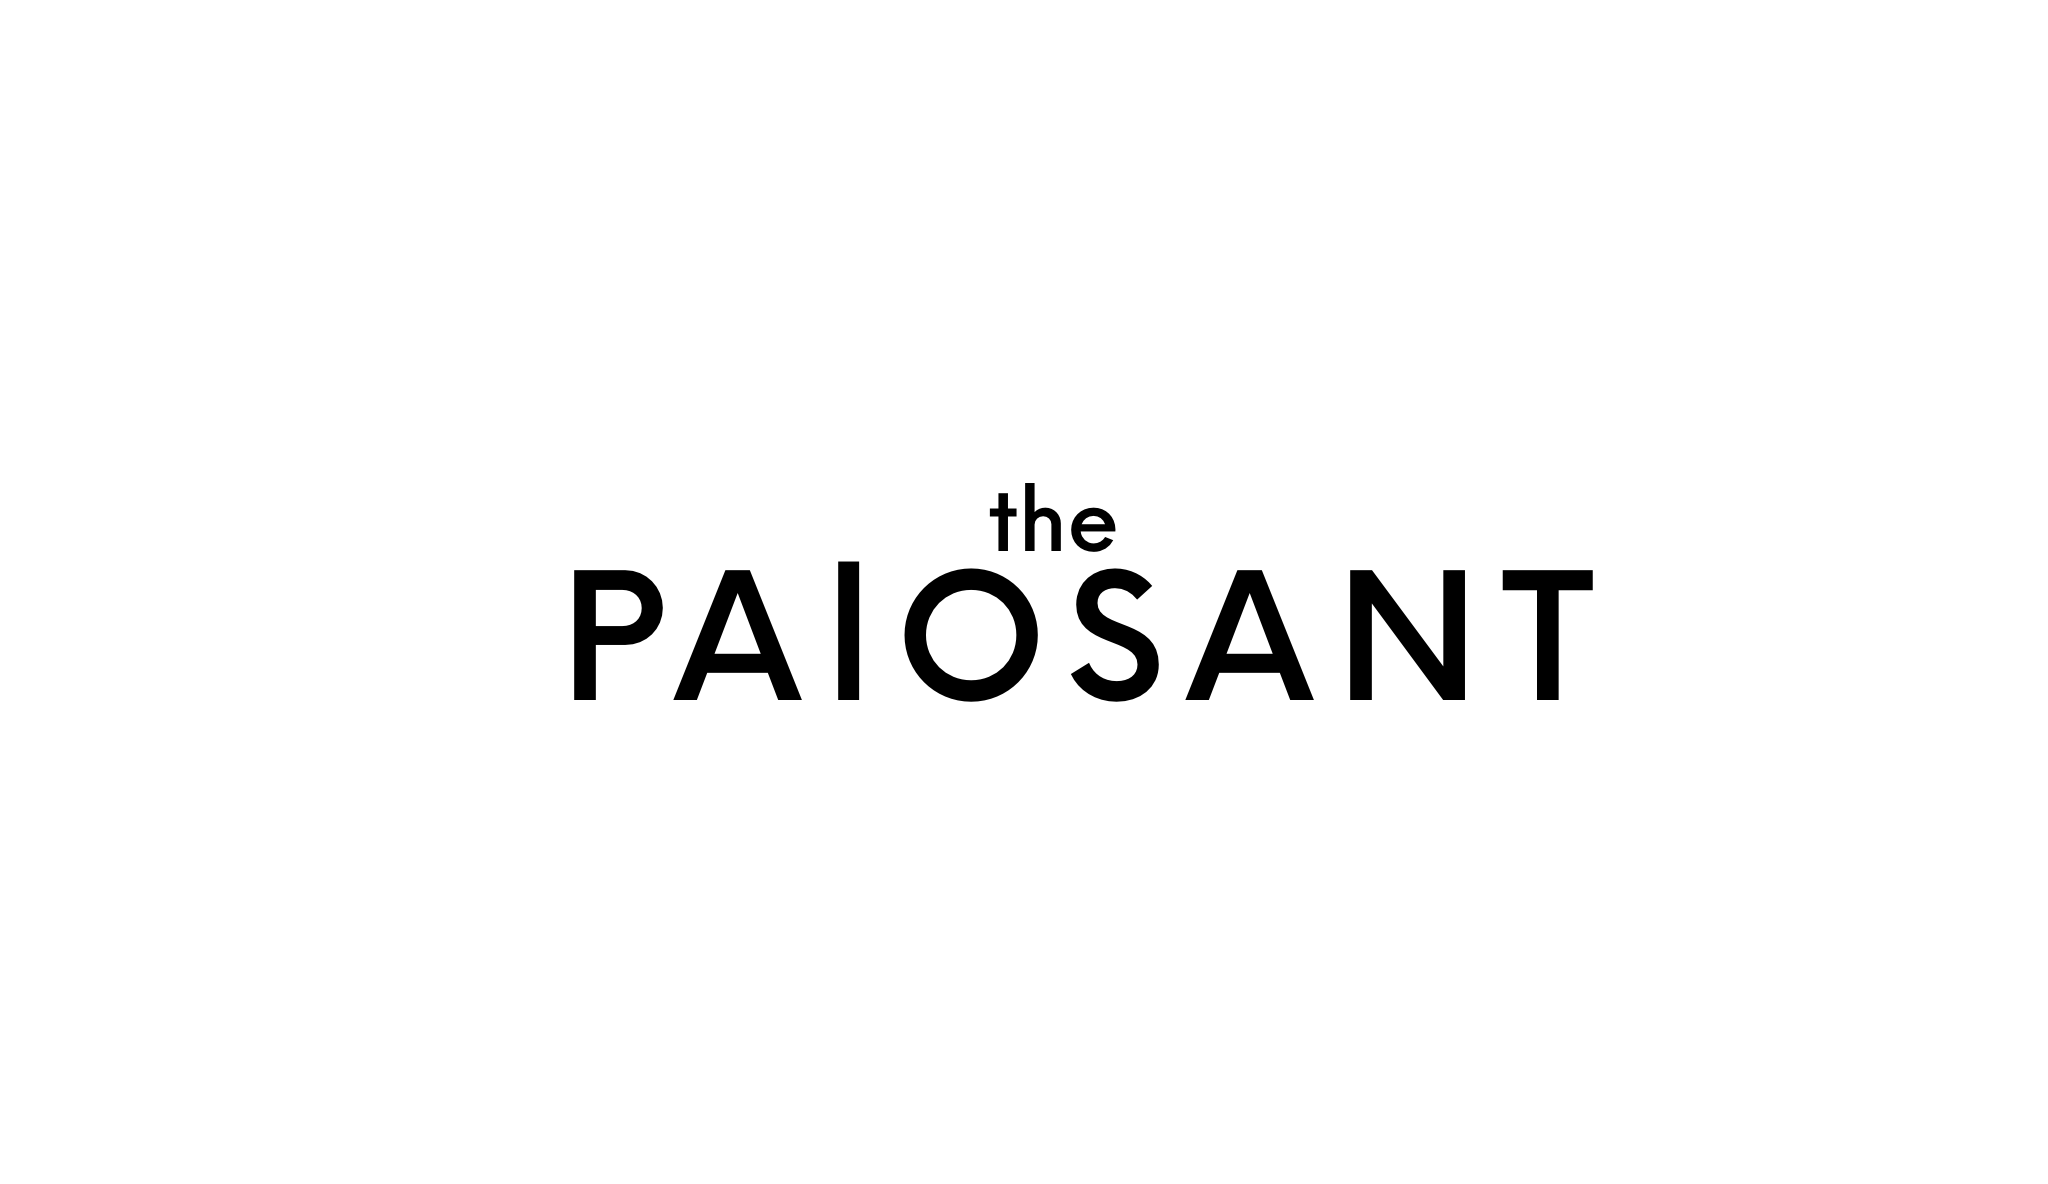 the palosant (パロサント)/ from hikoyoga